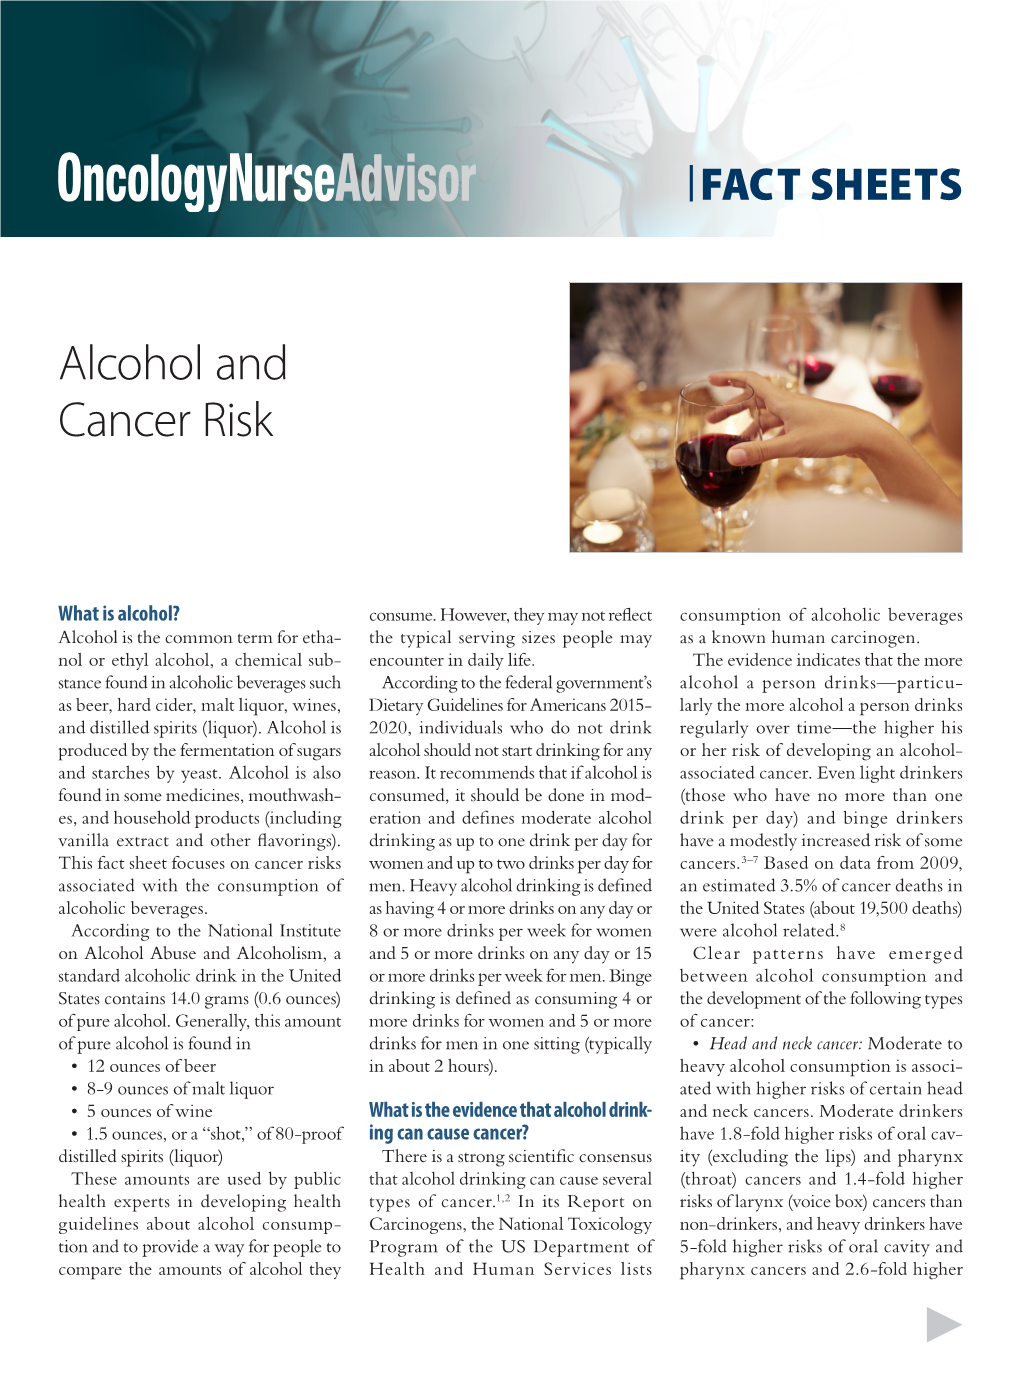 Alcohol and Cancer Risk